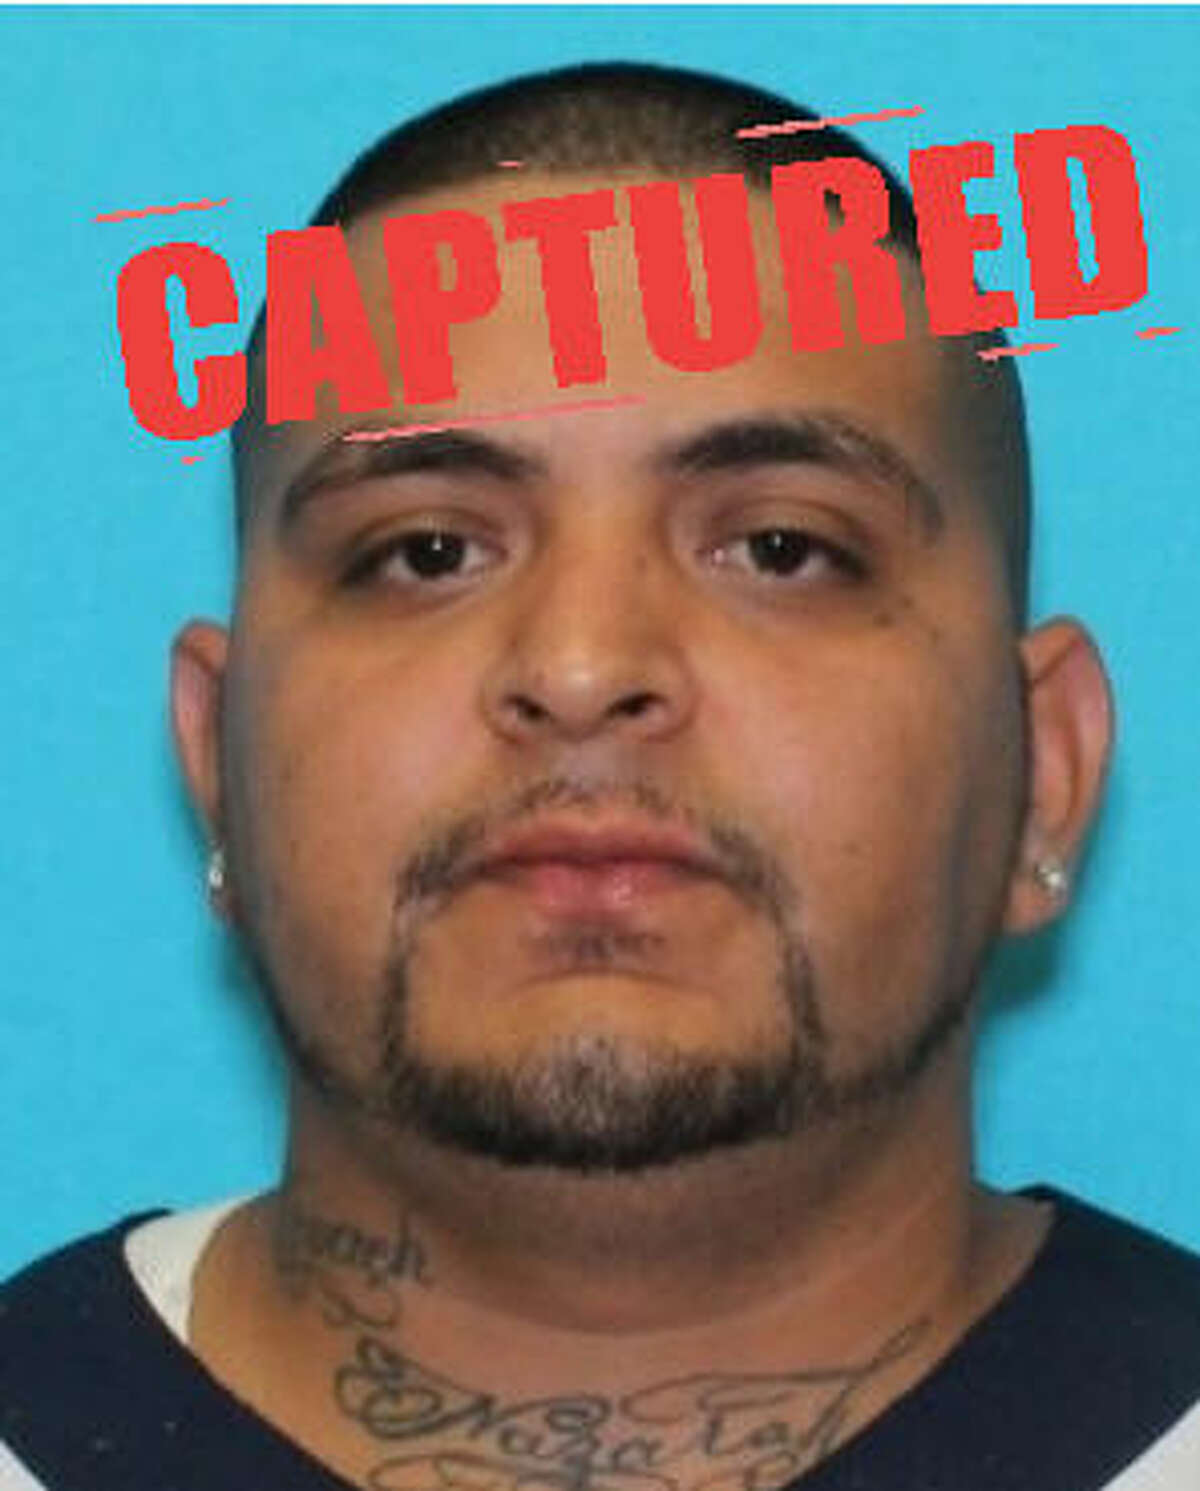 Wanted Sex Offender Arrested In San Antonio